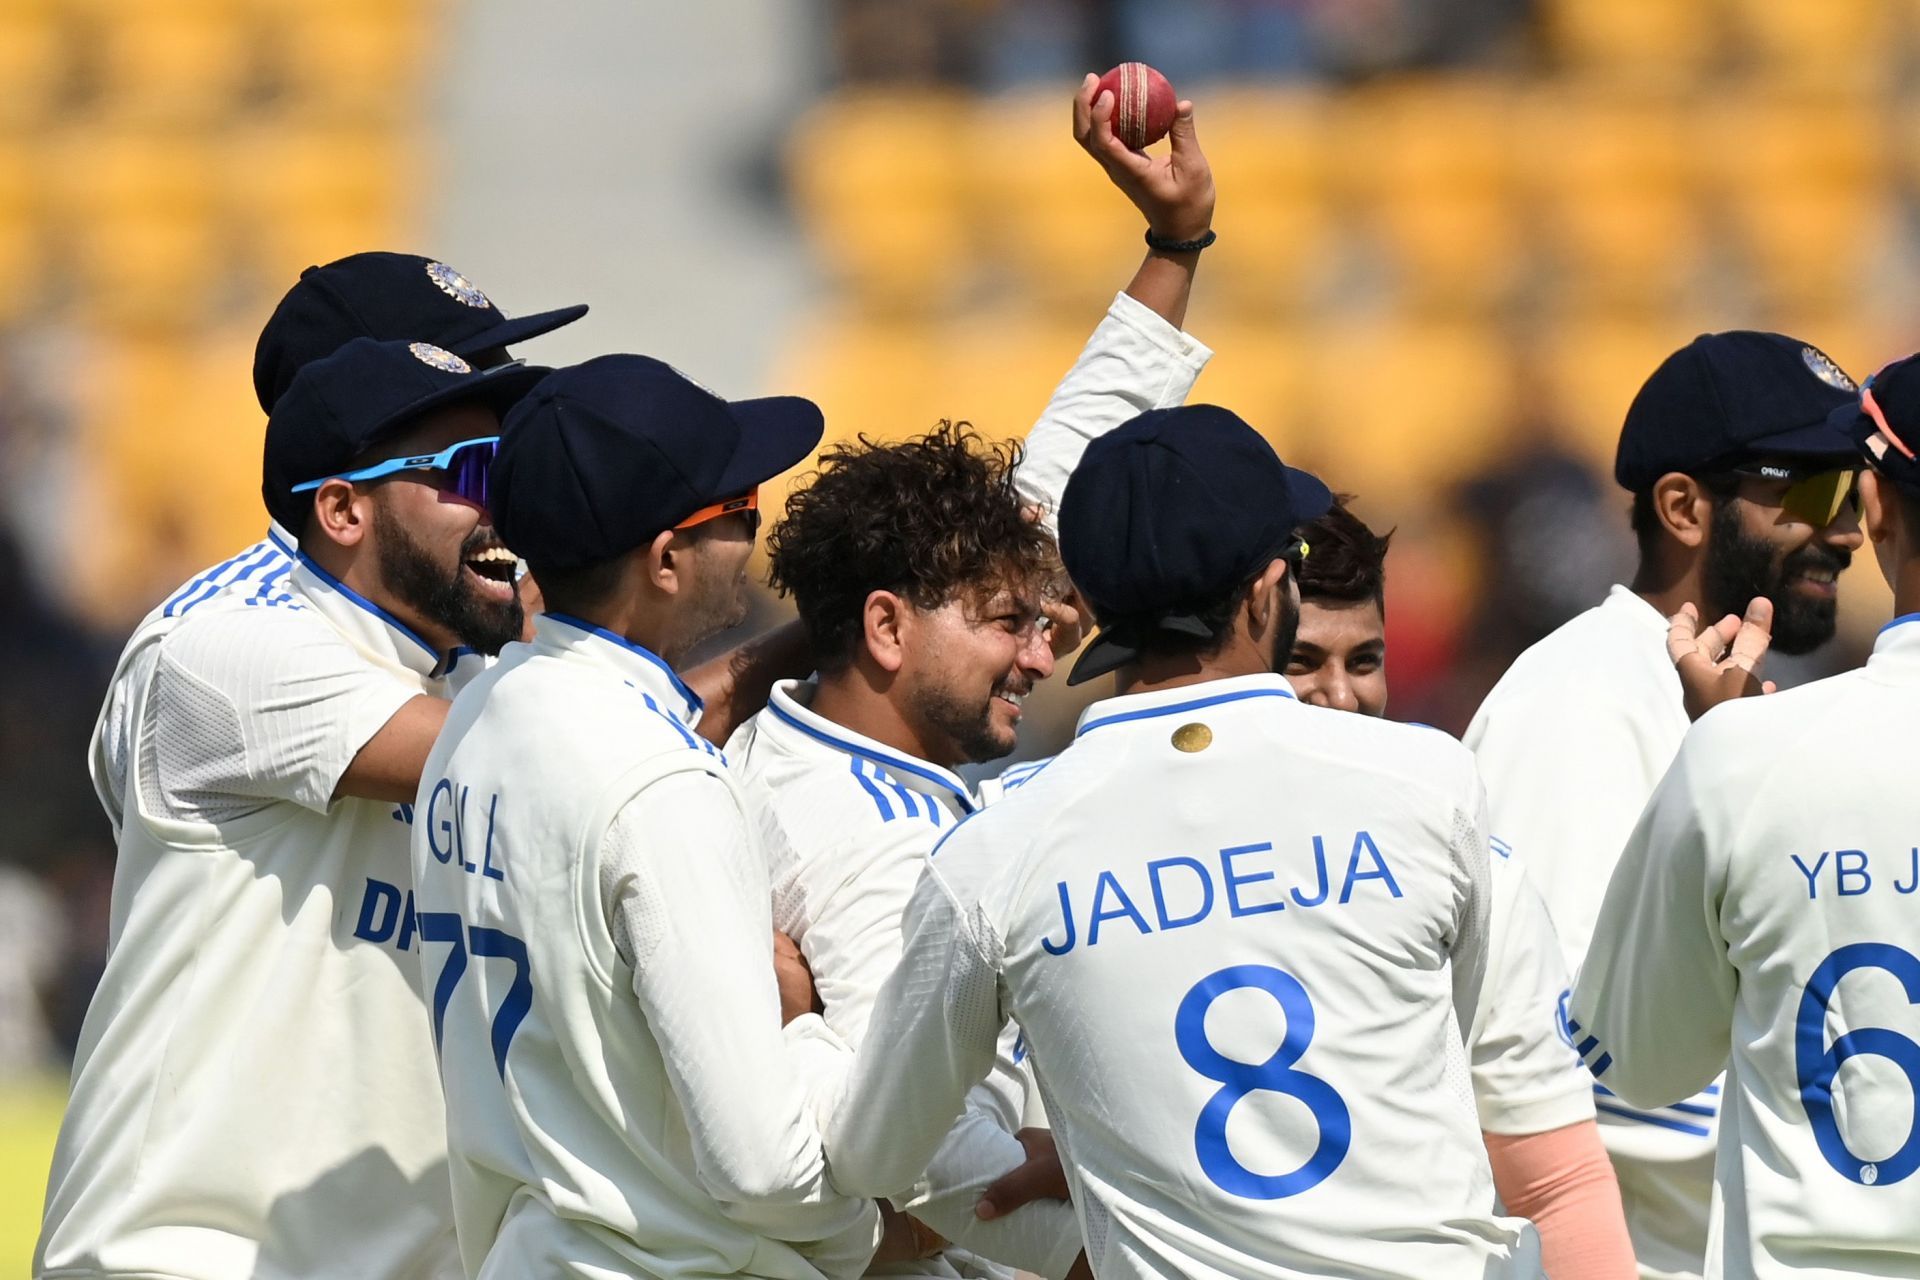 India  v England - 5th Test Match: Day One